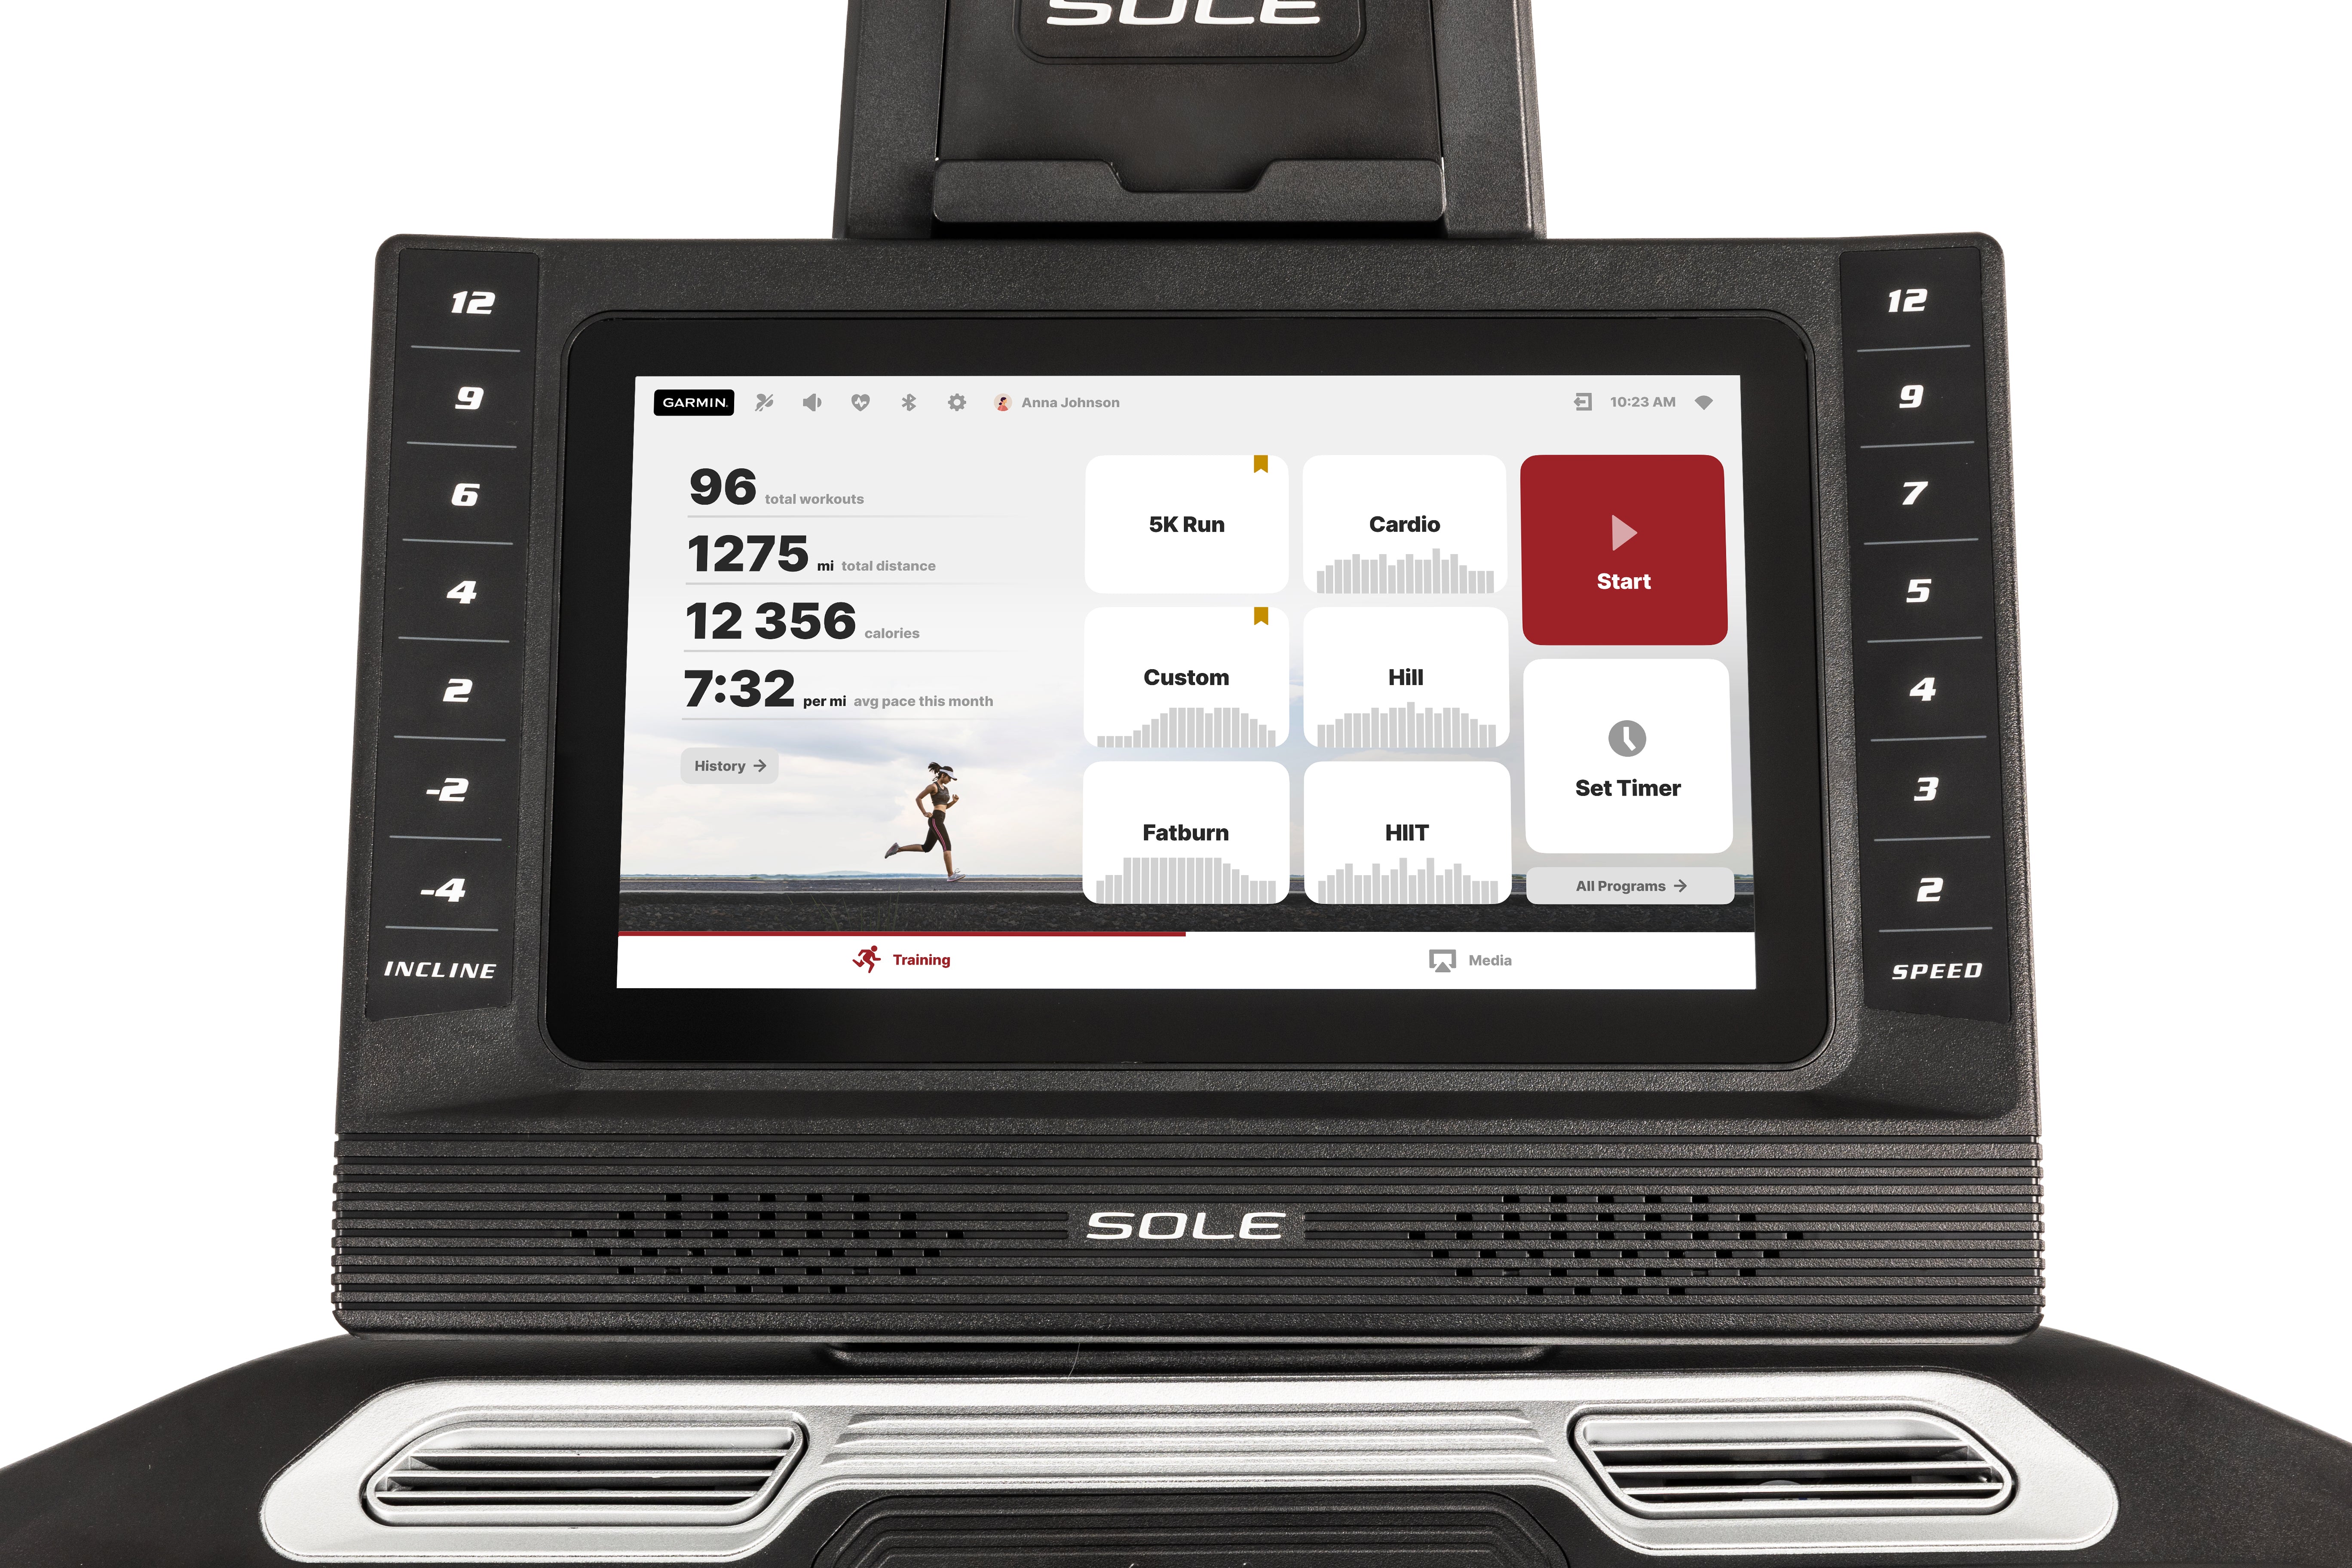 Front view of the Sole F85 treadmill's advanced digital display showcasing workout statistics, selectable training programs like "5K Run" and "HIIT", and touchscreen controls, flanked by incline and speed adjustment buttons, with the SOLE branding visible below the screen and air vents.